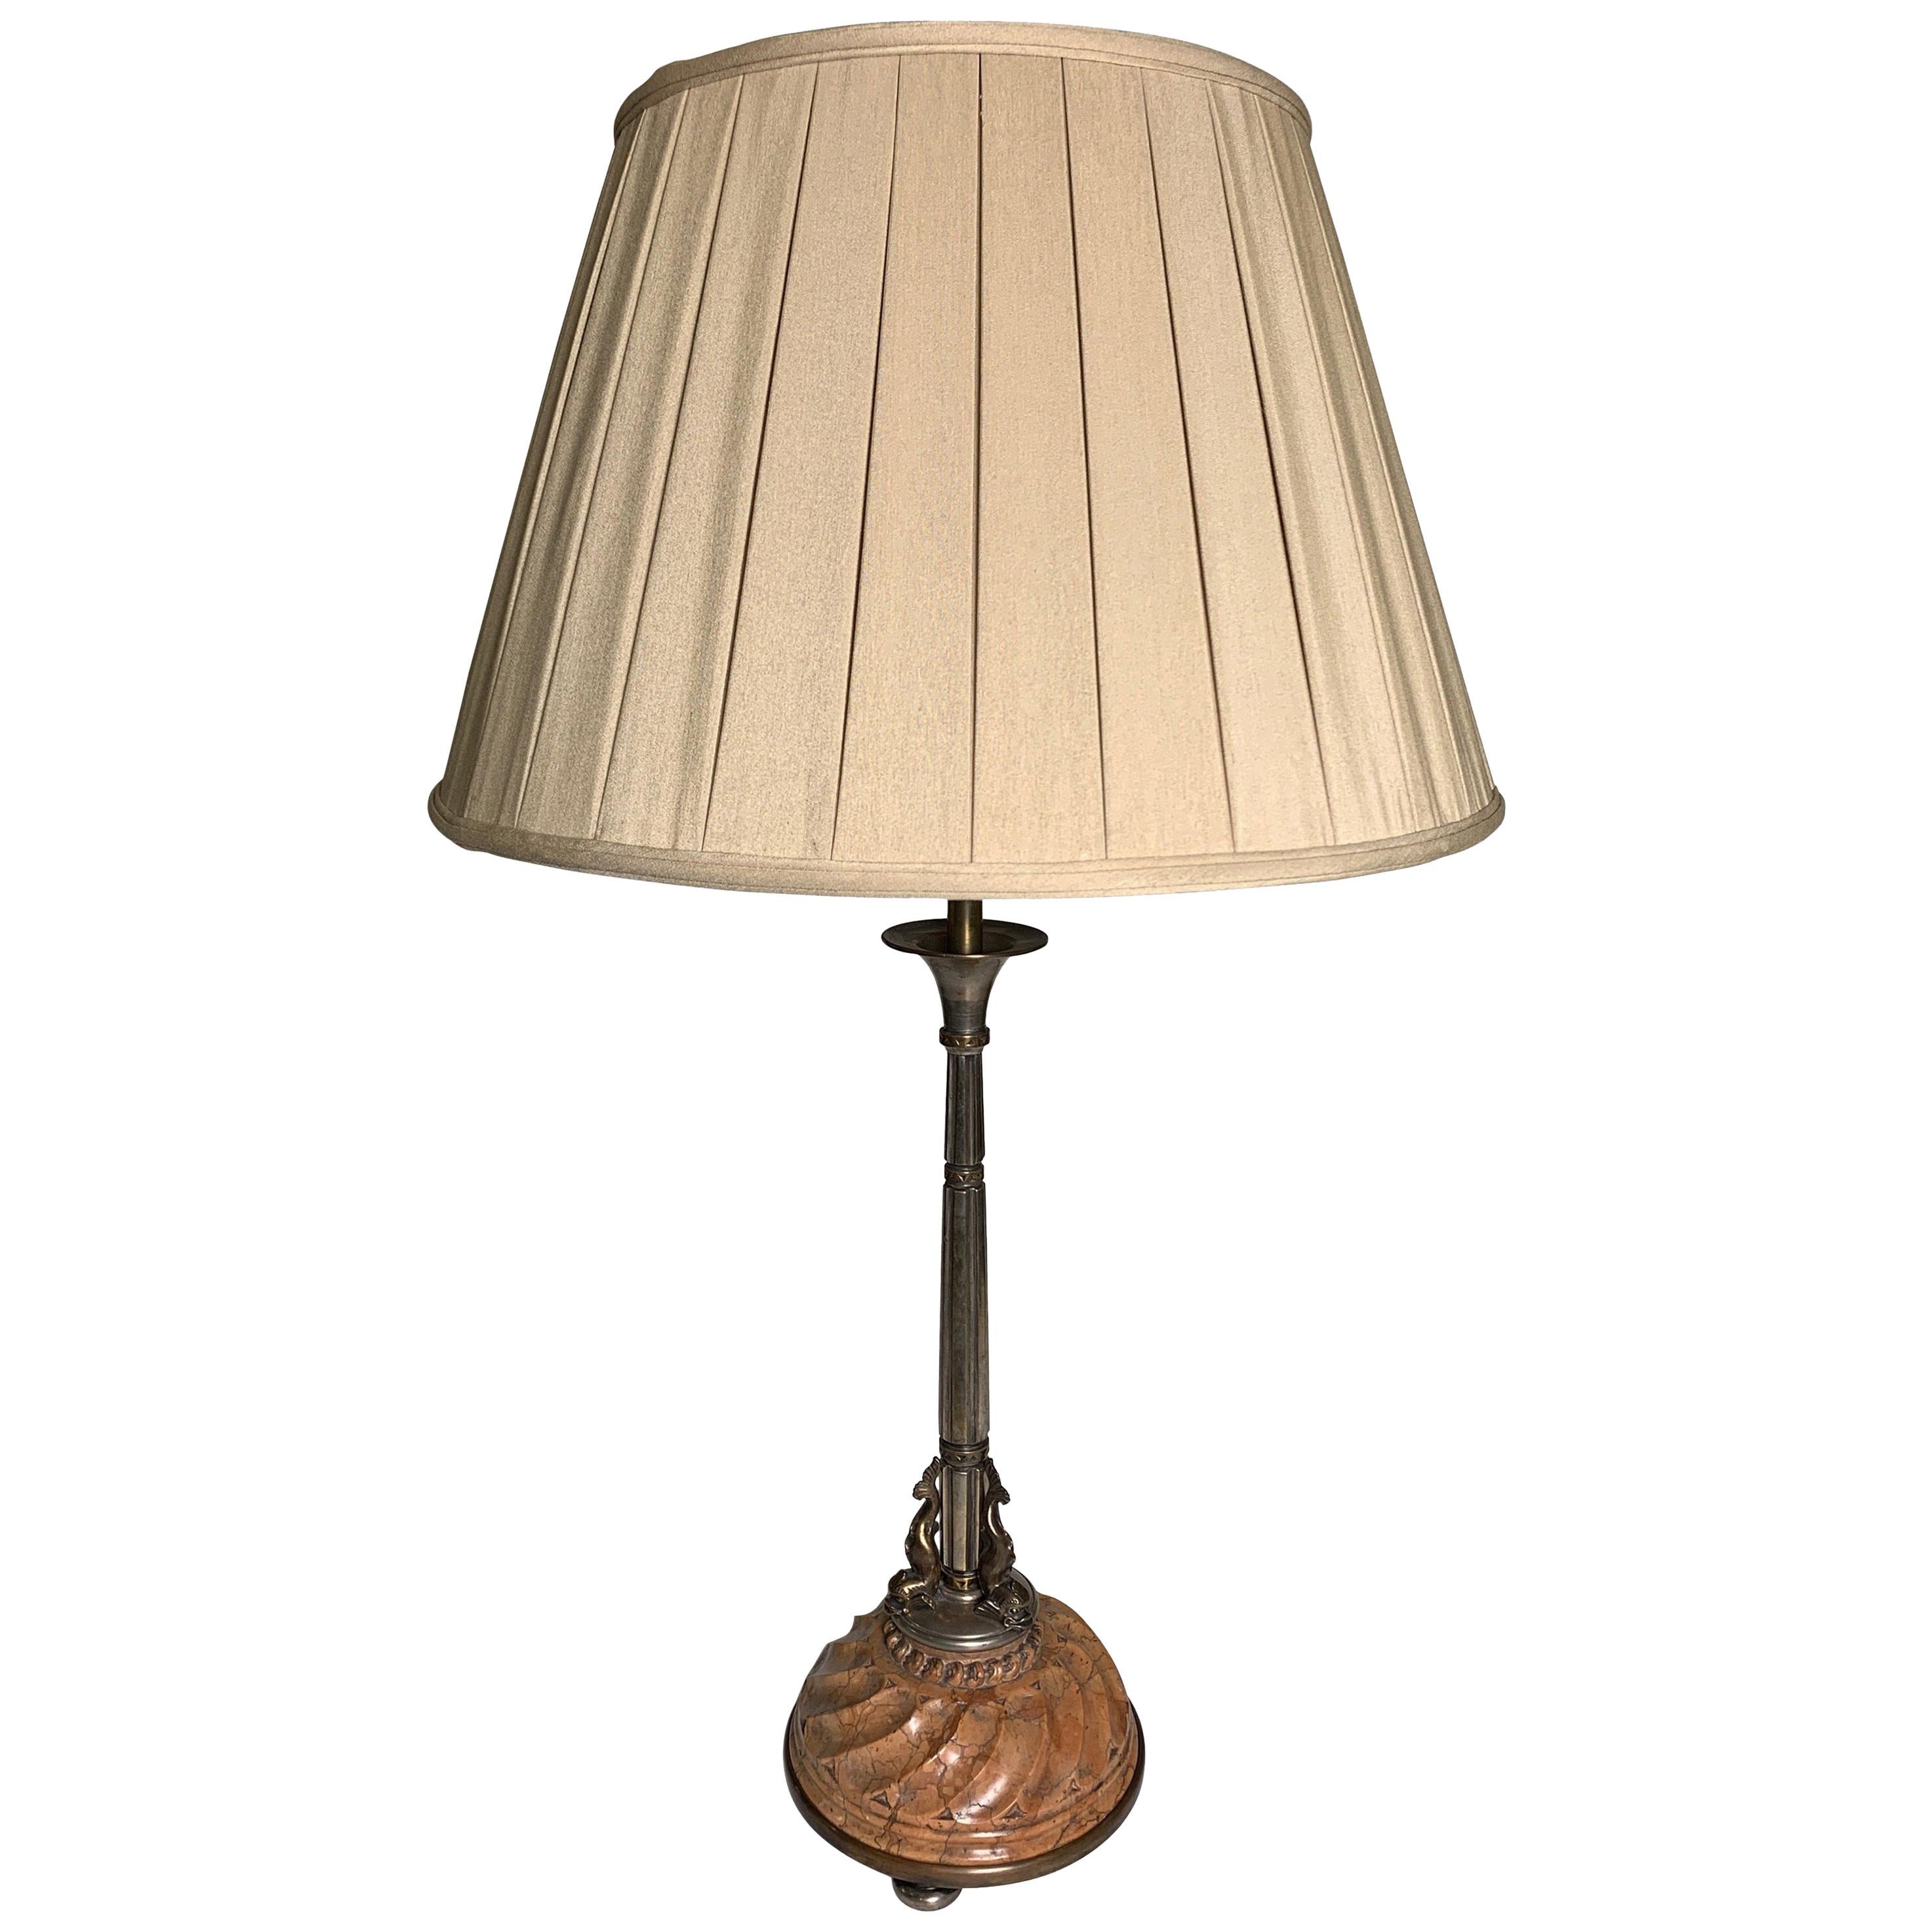 Oscar Bach circa 1920 Silvered Bronze Table Lamp with Carved Italian Marble Base